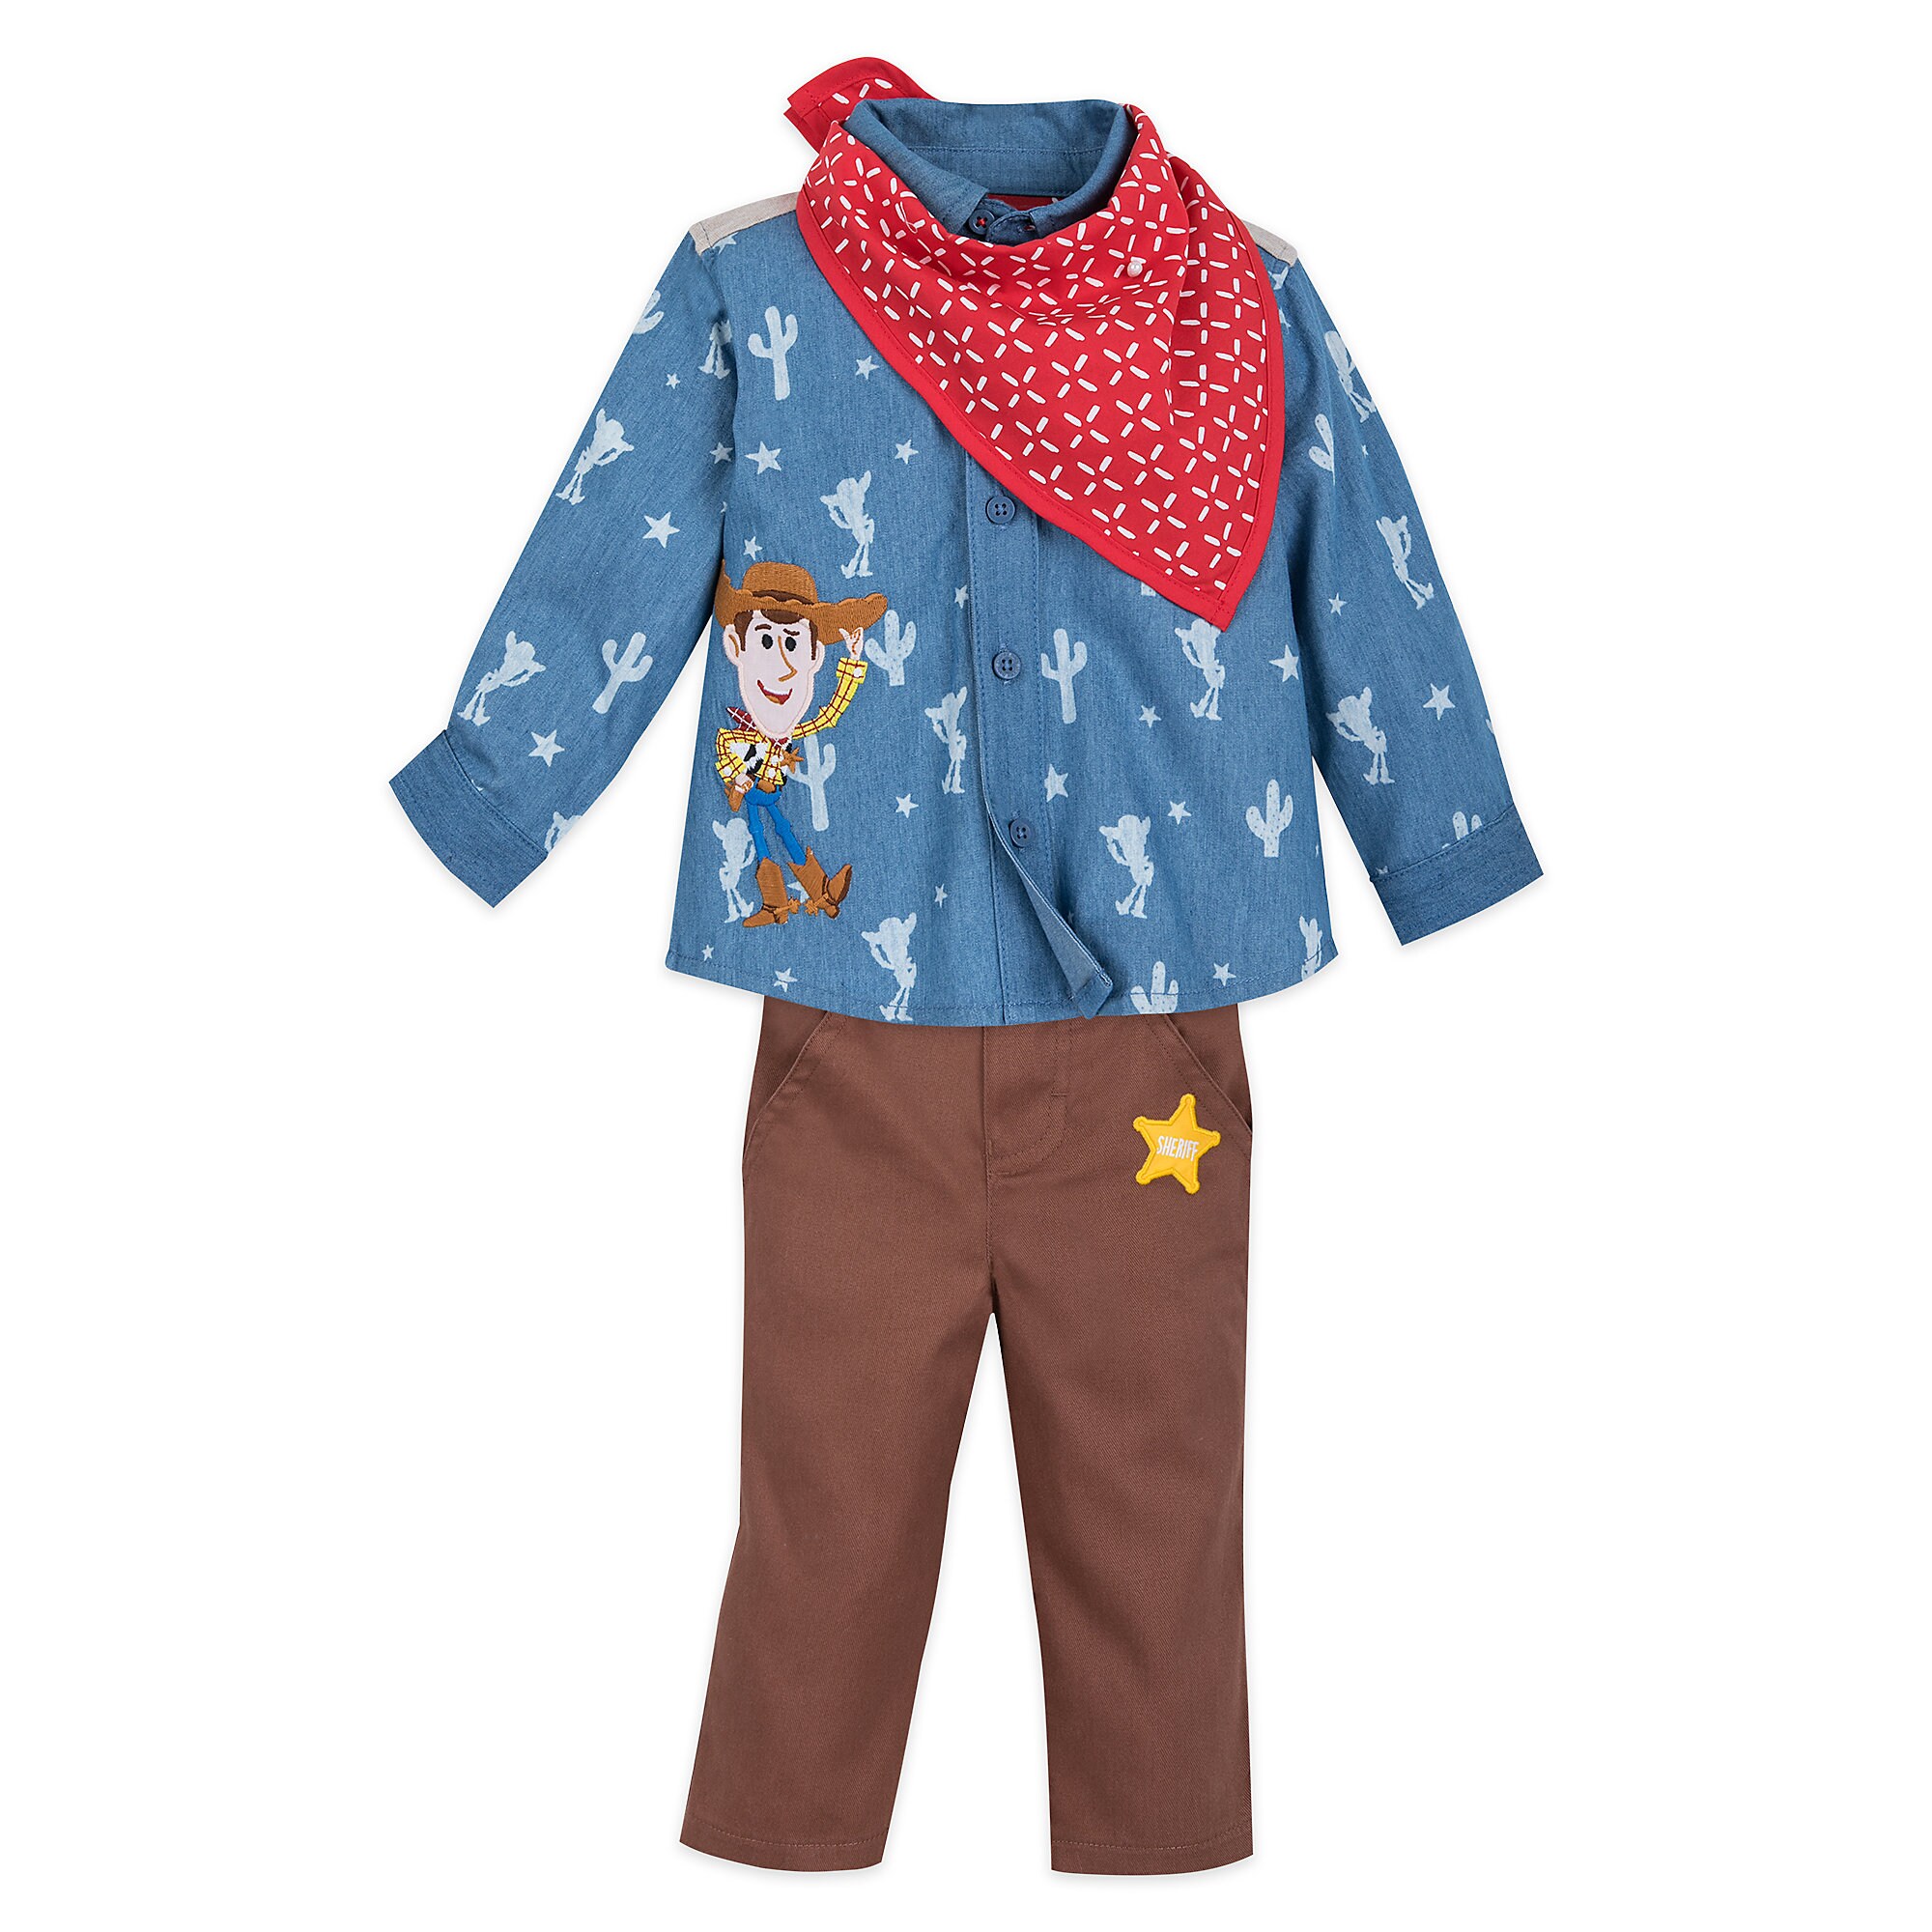 Woody Shirt and Pants Set for Baby